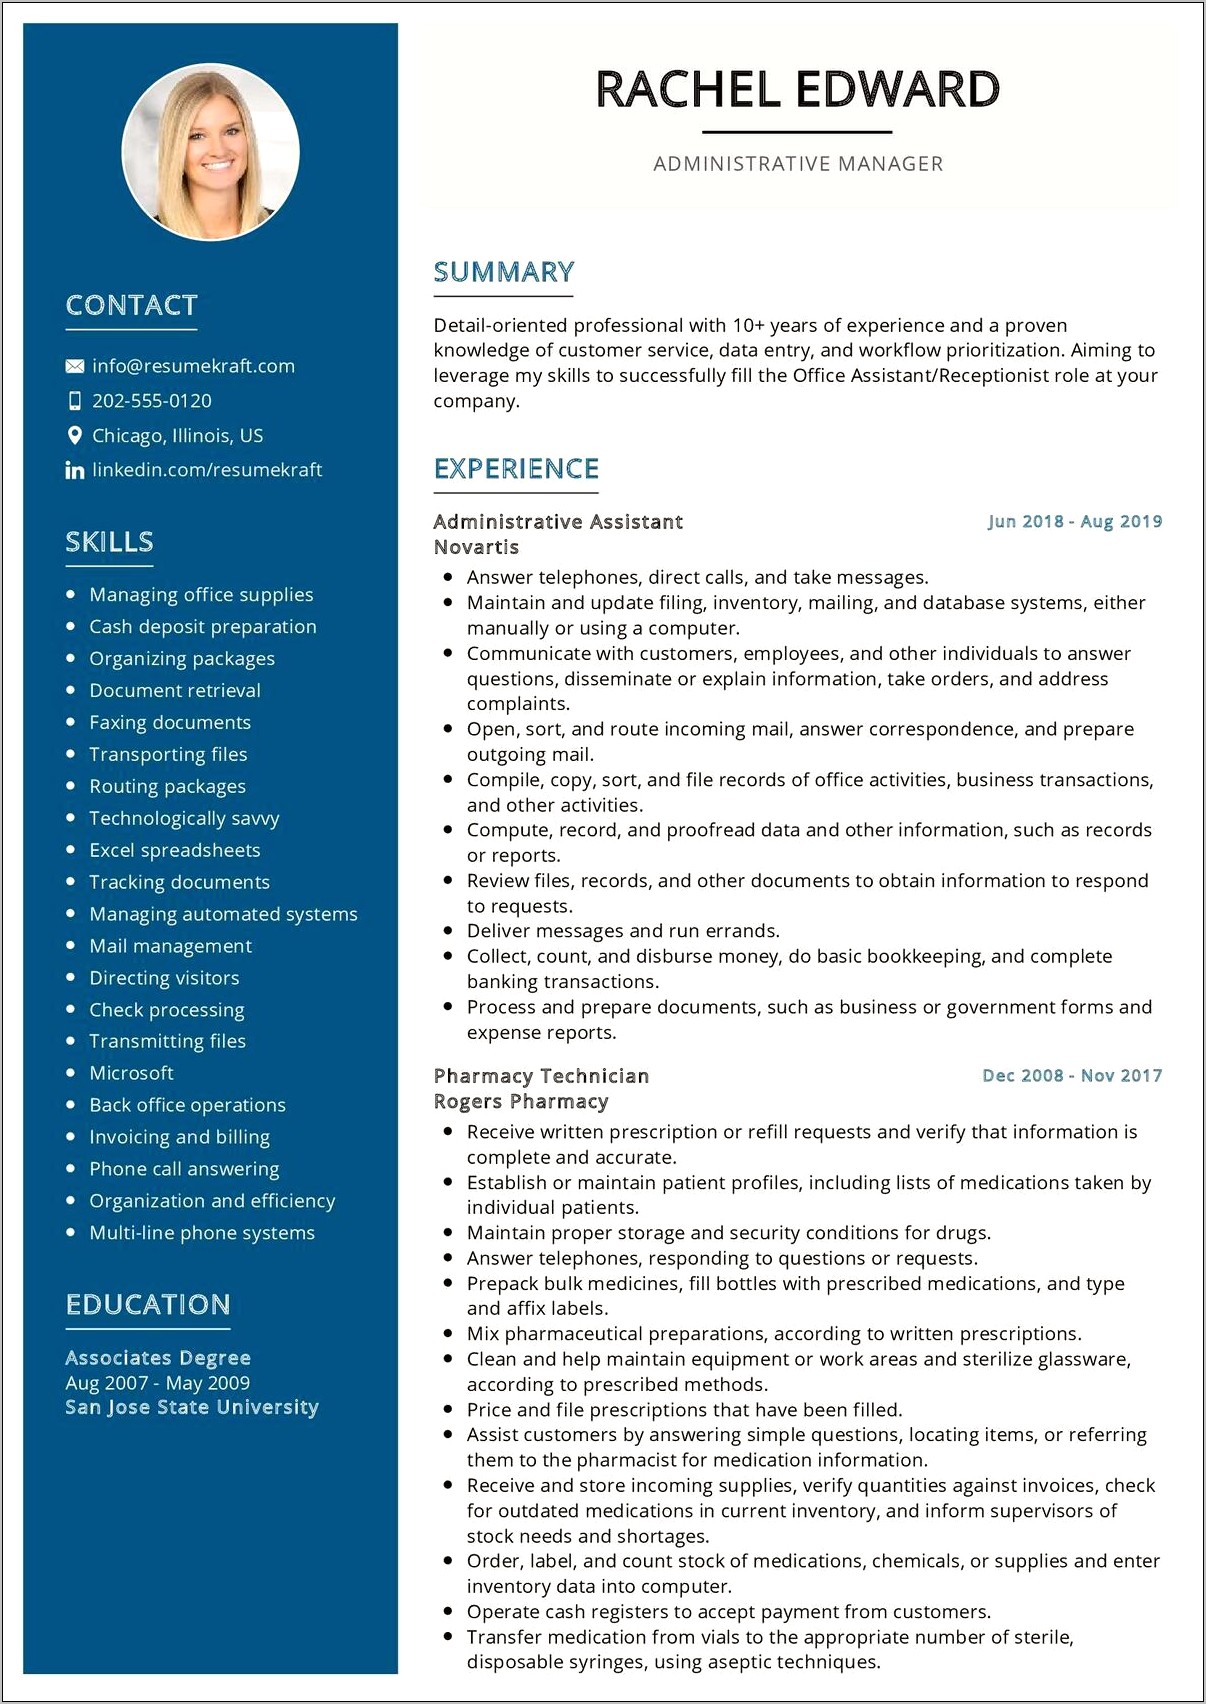 Summary For Administrative Manager Resume